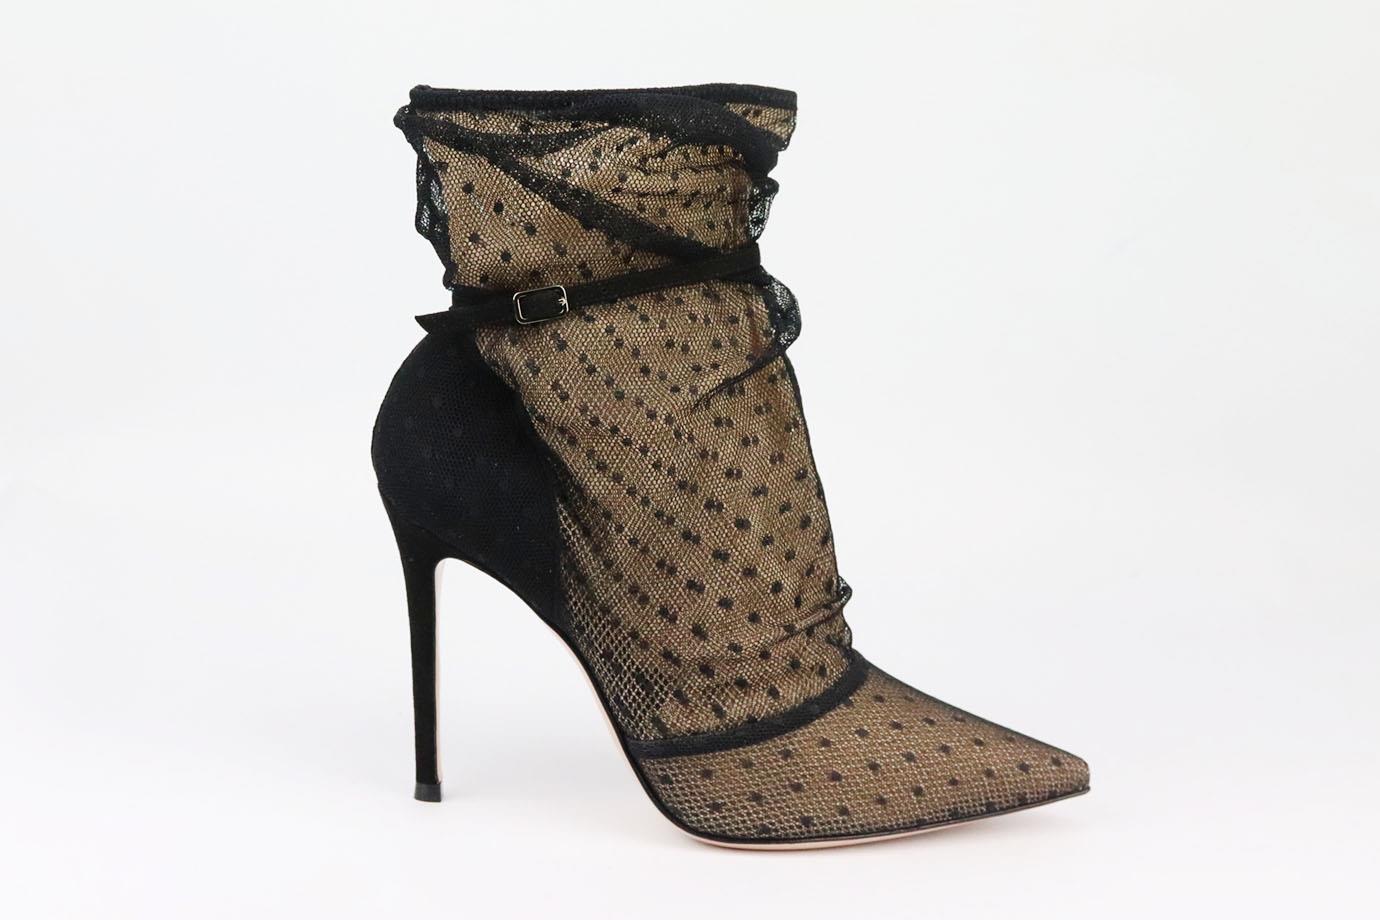 GIANVITO ROSSI POLKA DOT TULLE AND SUEDE ANKLE BOOTS EU 38.5 UK 5.5 US 8.5